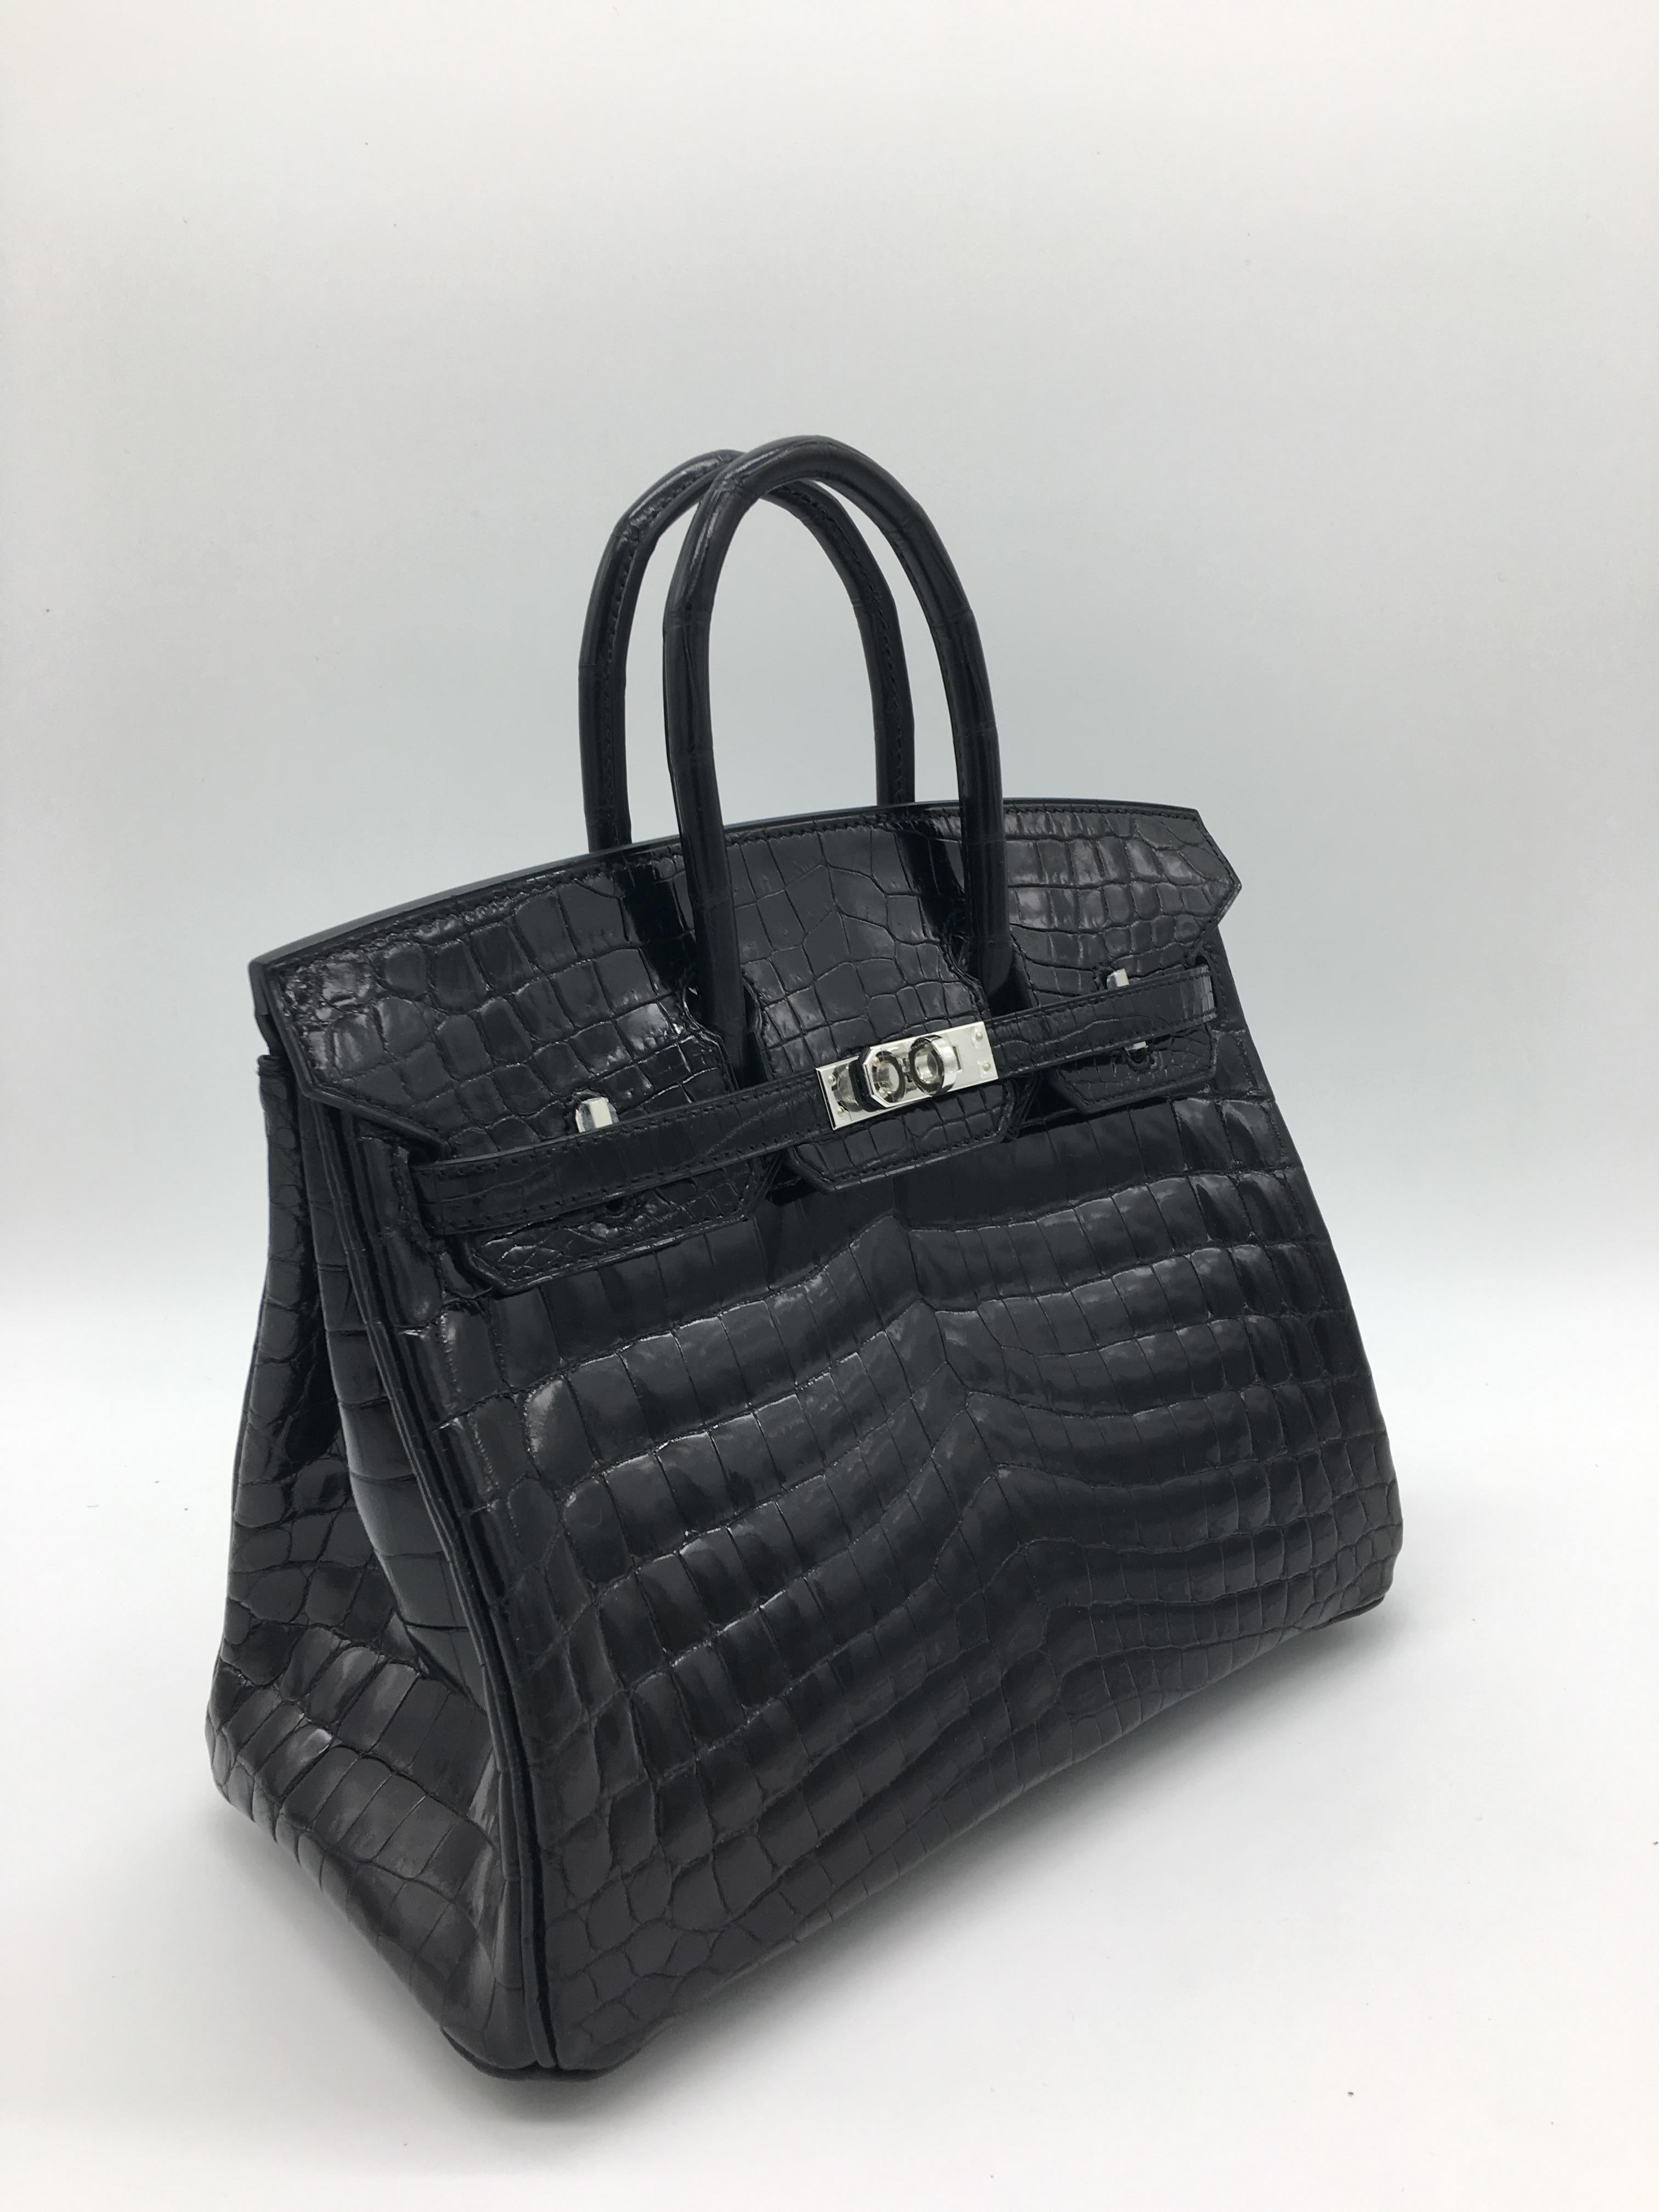 The 25cm Birkin is a hugely popular size and especially desirable in this classic combination of Black Shiny Nilocitus Crocodile with Palladium Hardware. It’s such a beautiful bag and the perfect size for carrying everything you need for the daytime